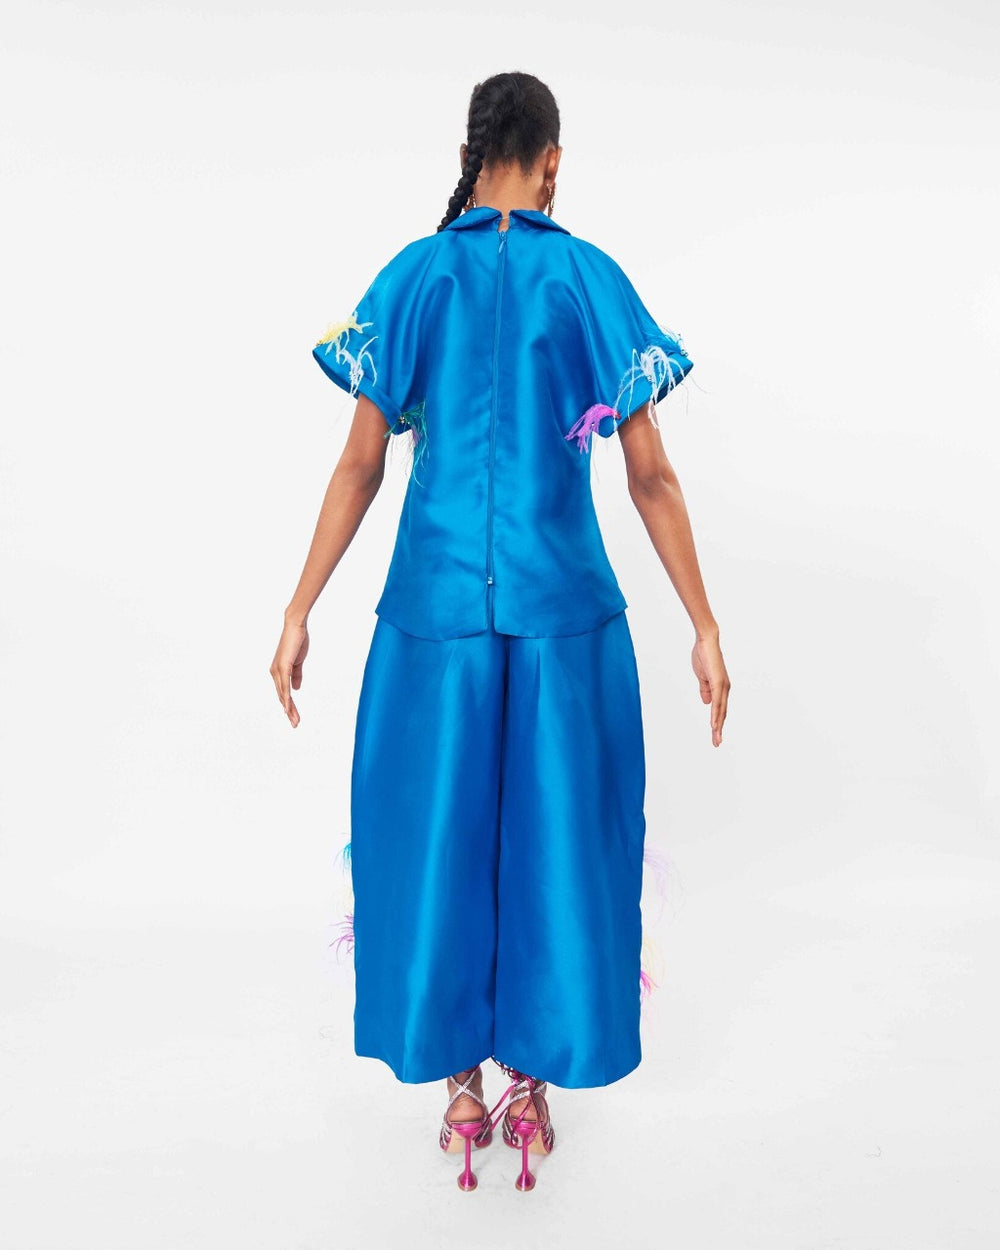 The back of a model wearing a Turquoise top with criss-cross neckline and Turquoise pants with a waist pleat detail and ostrich feathers embellishments